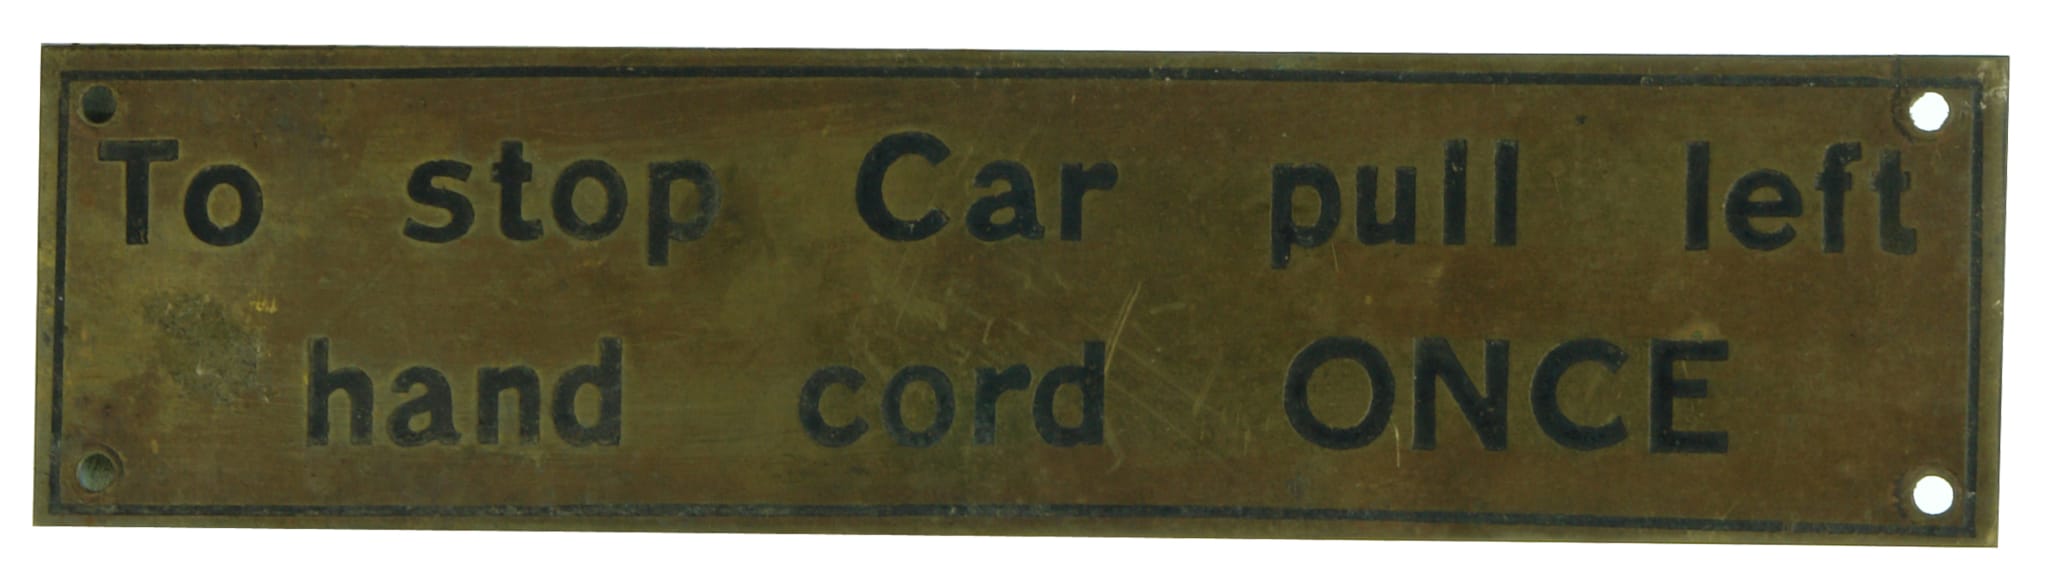 To stop car pull left hand cord ONCE brass sign